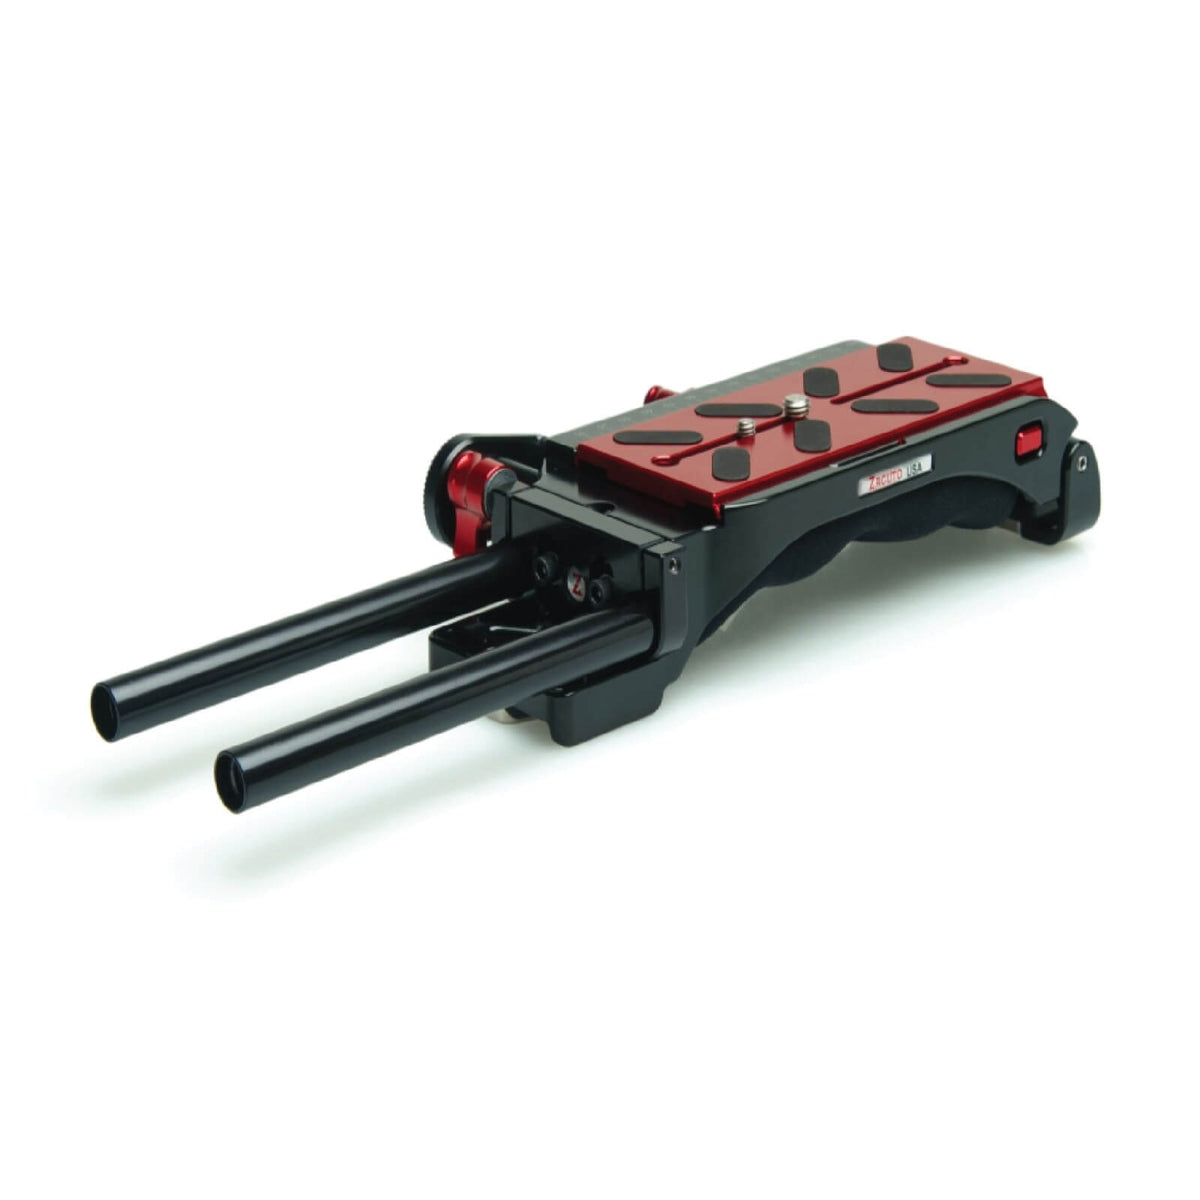 Official Zacuto VCT Pro Shoulder Mounted Baseplate for Canon